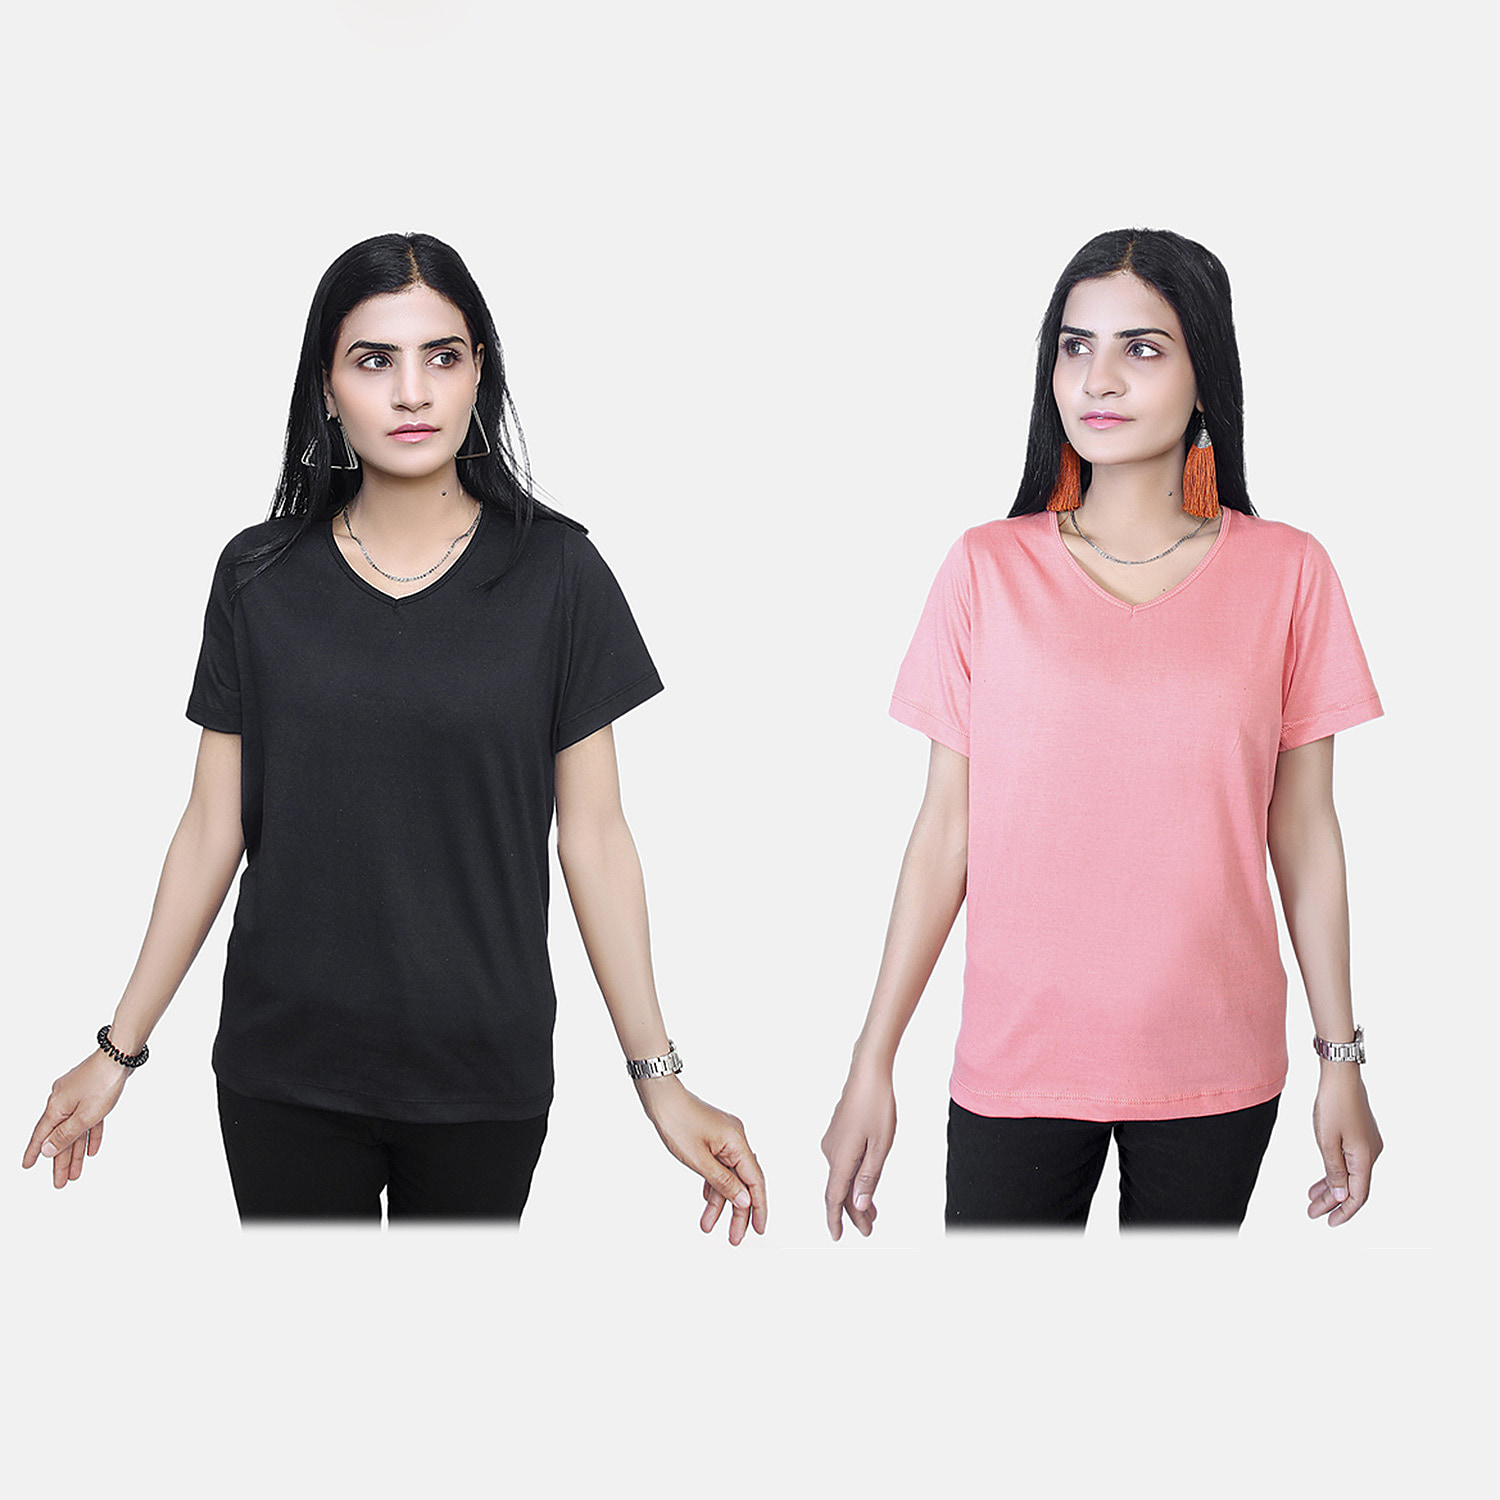 TAMSY Set of 2 Short Sleeve Classic V Neck Cotton Blend T-Shirt (Size M) - Black & Coral